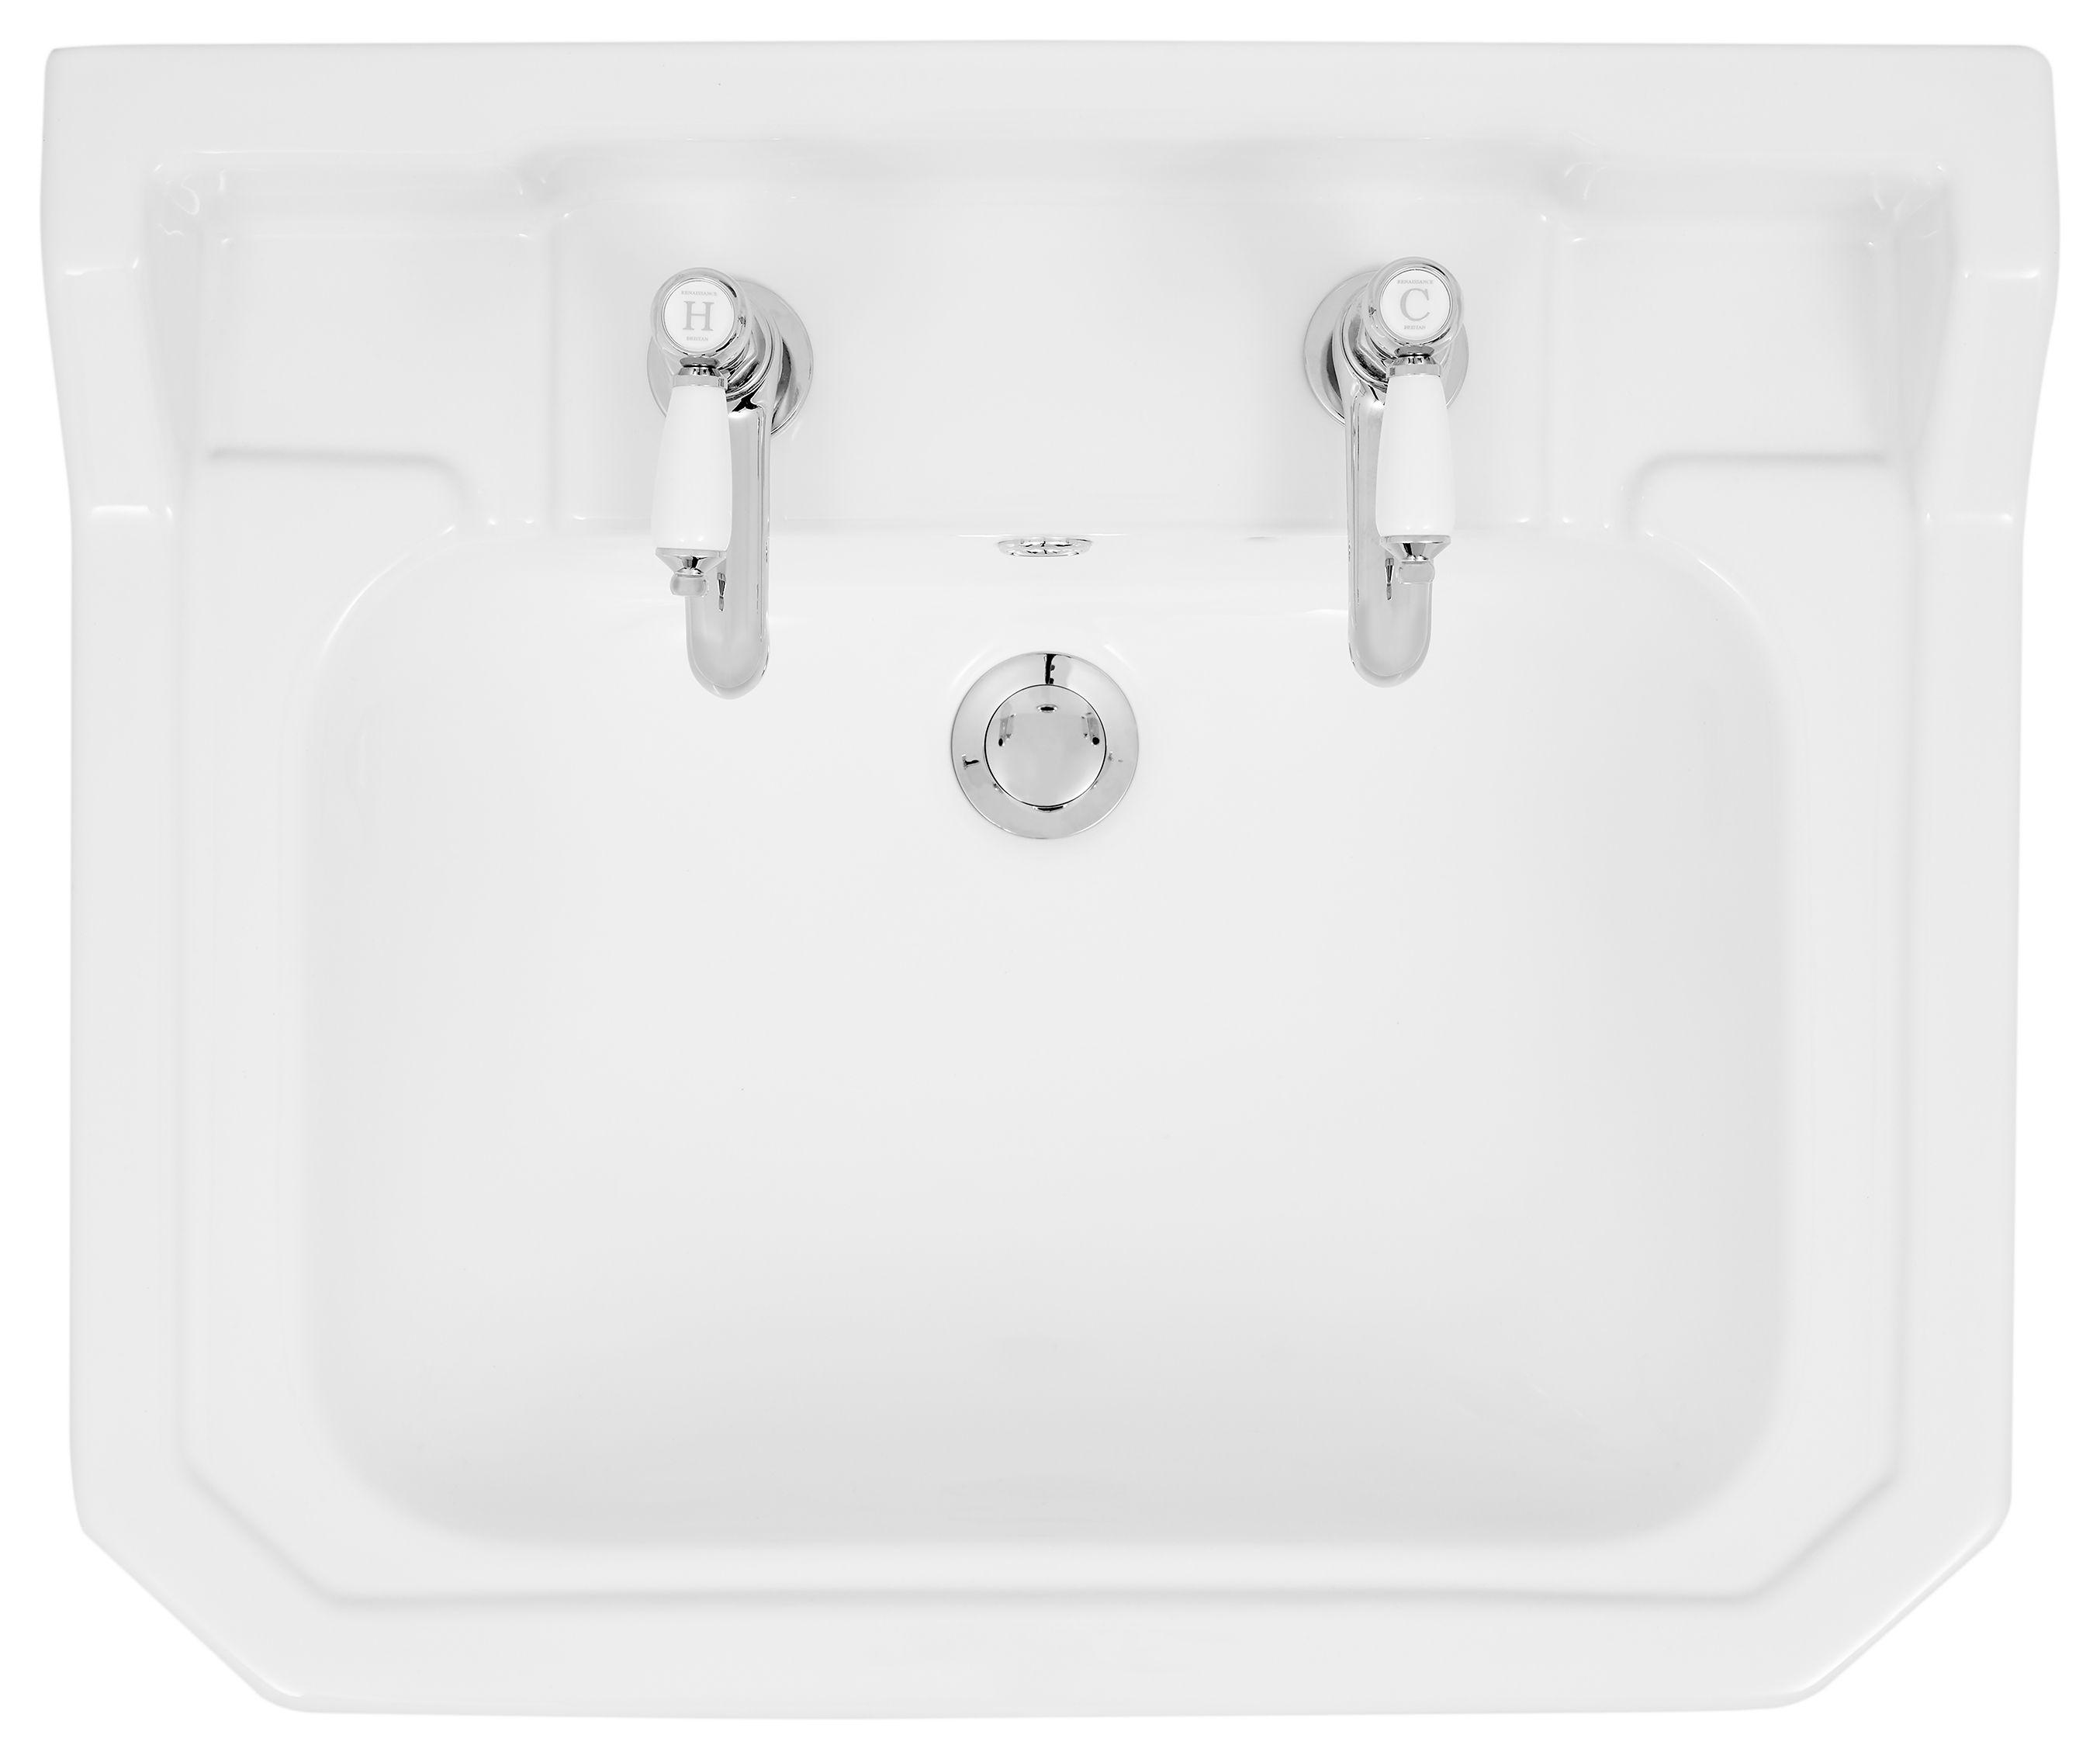 Image of Wickes Oxford Traditional 2 Tap Hole Semi Recessed Bathroom Basin - 550mm